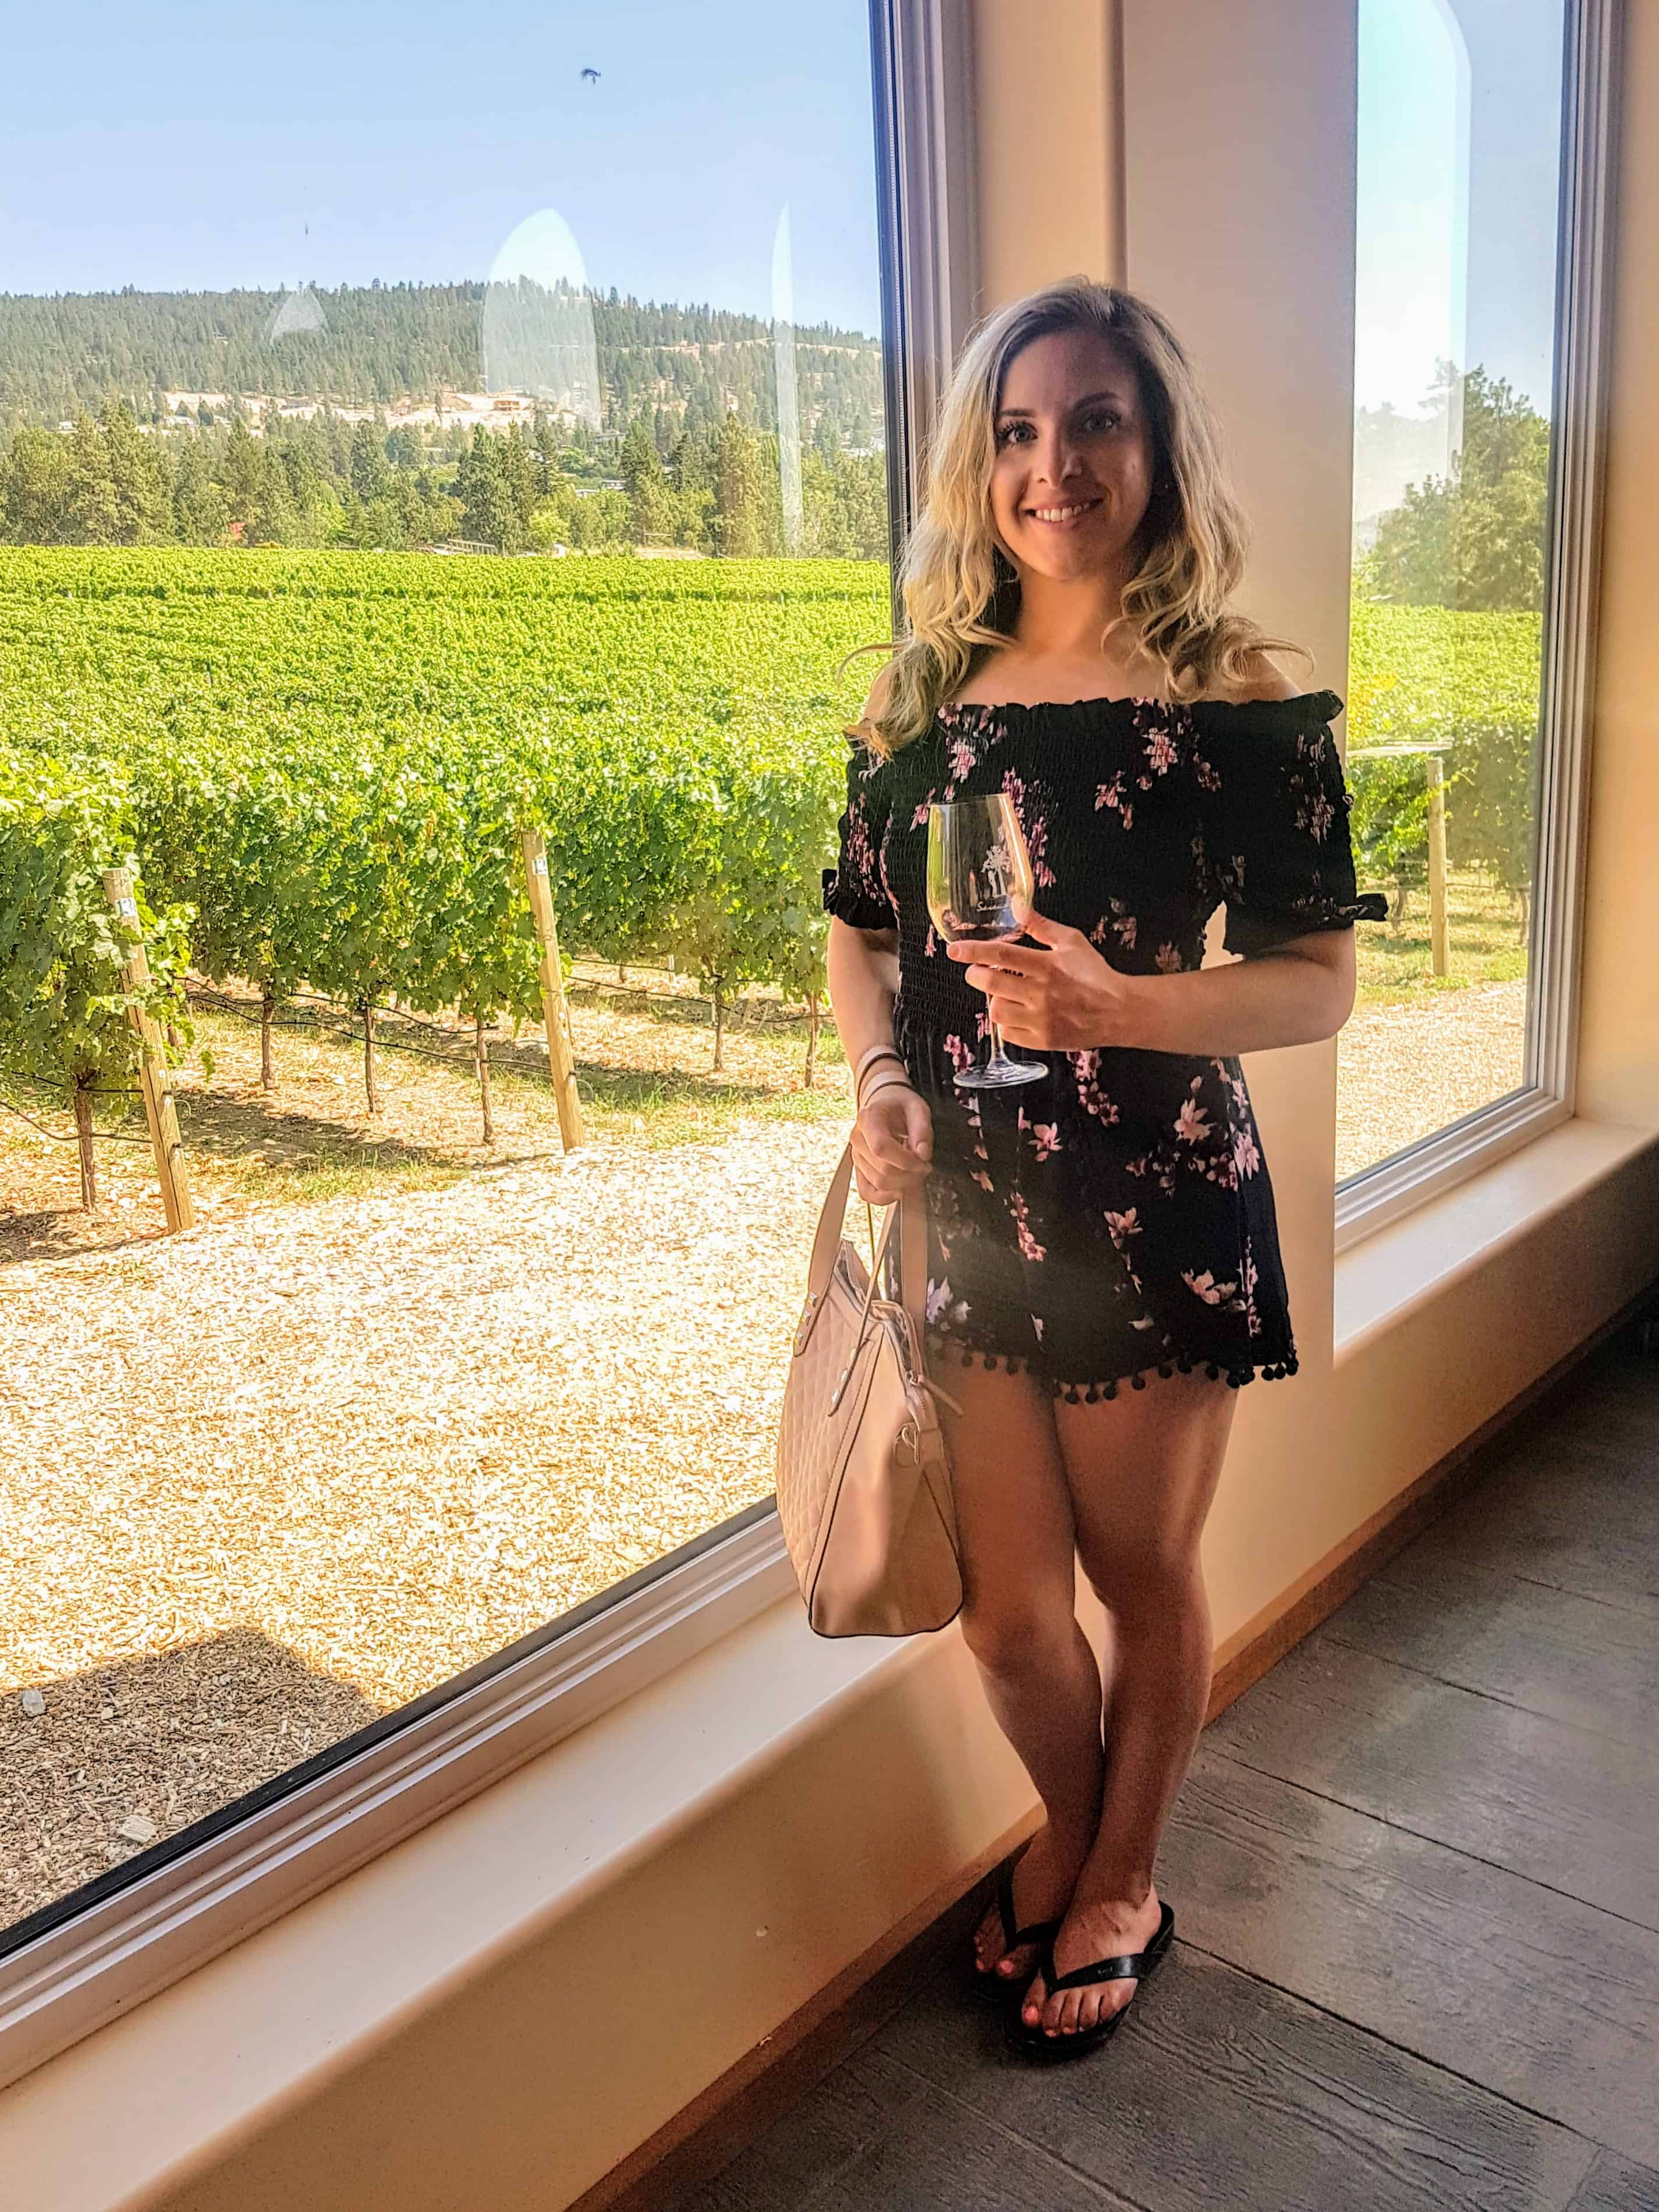 a girl holds a glass of wine standing in front of a window looking out onto the grape vines